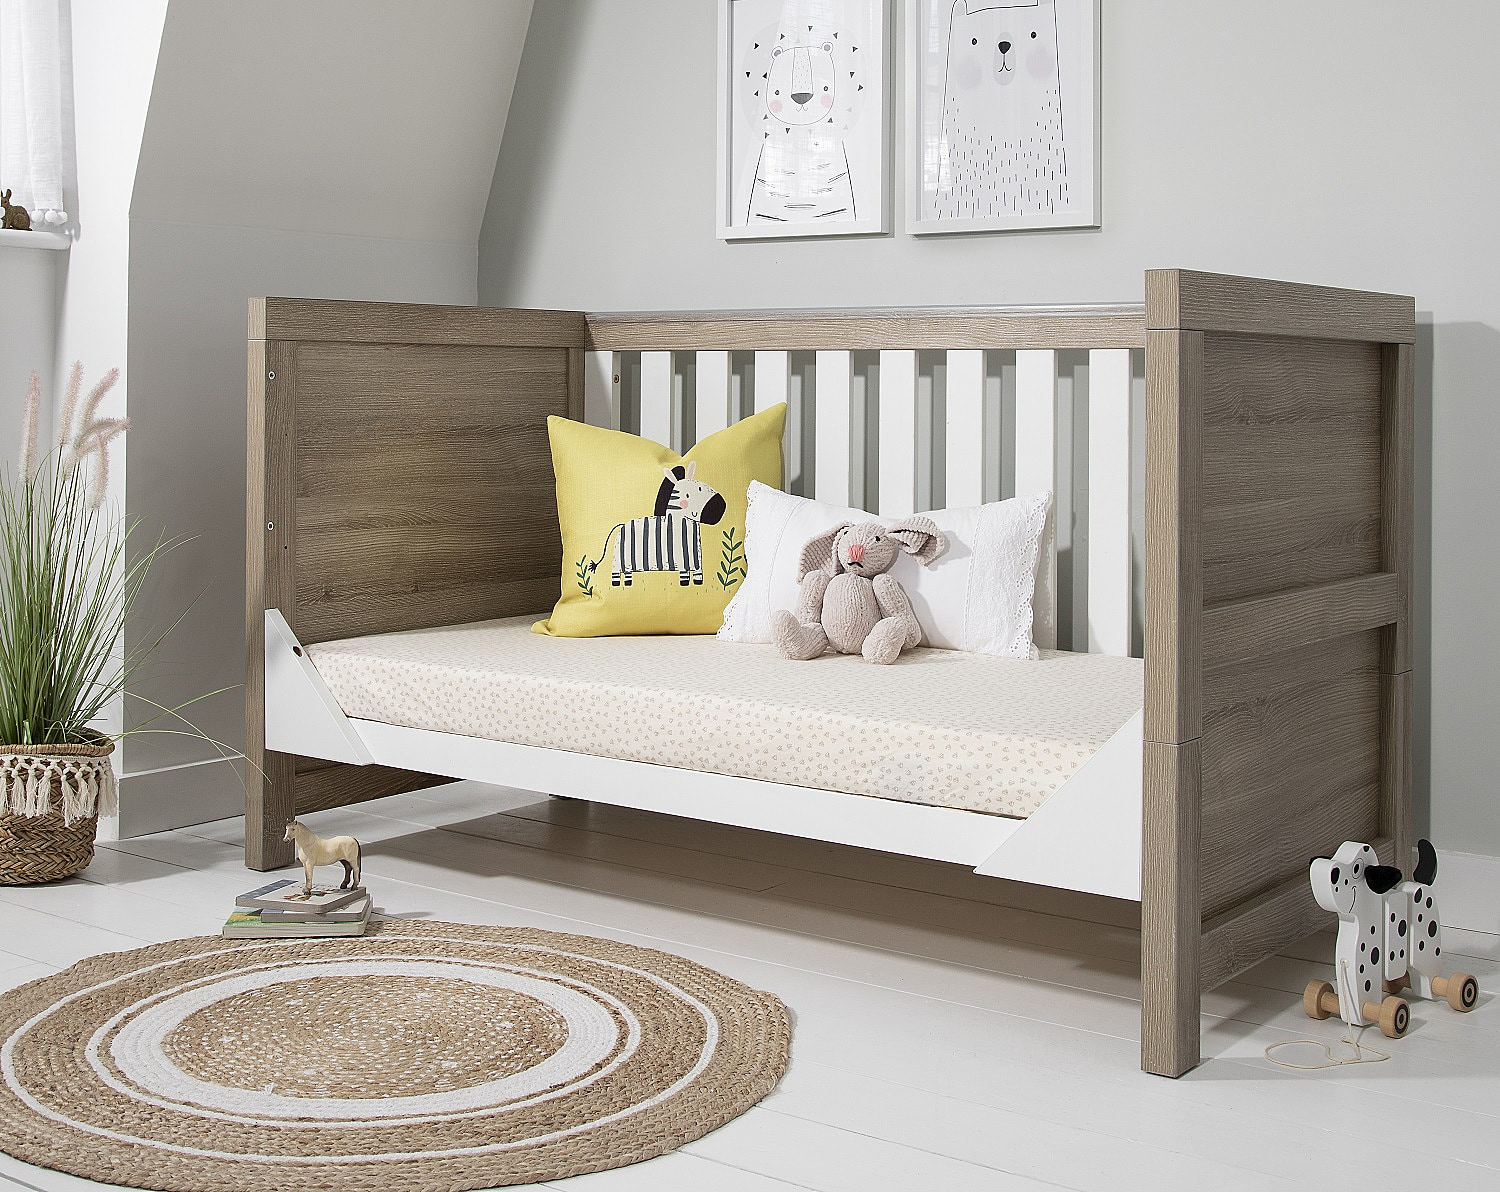 Modena 20 in 20 Cot bed